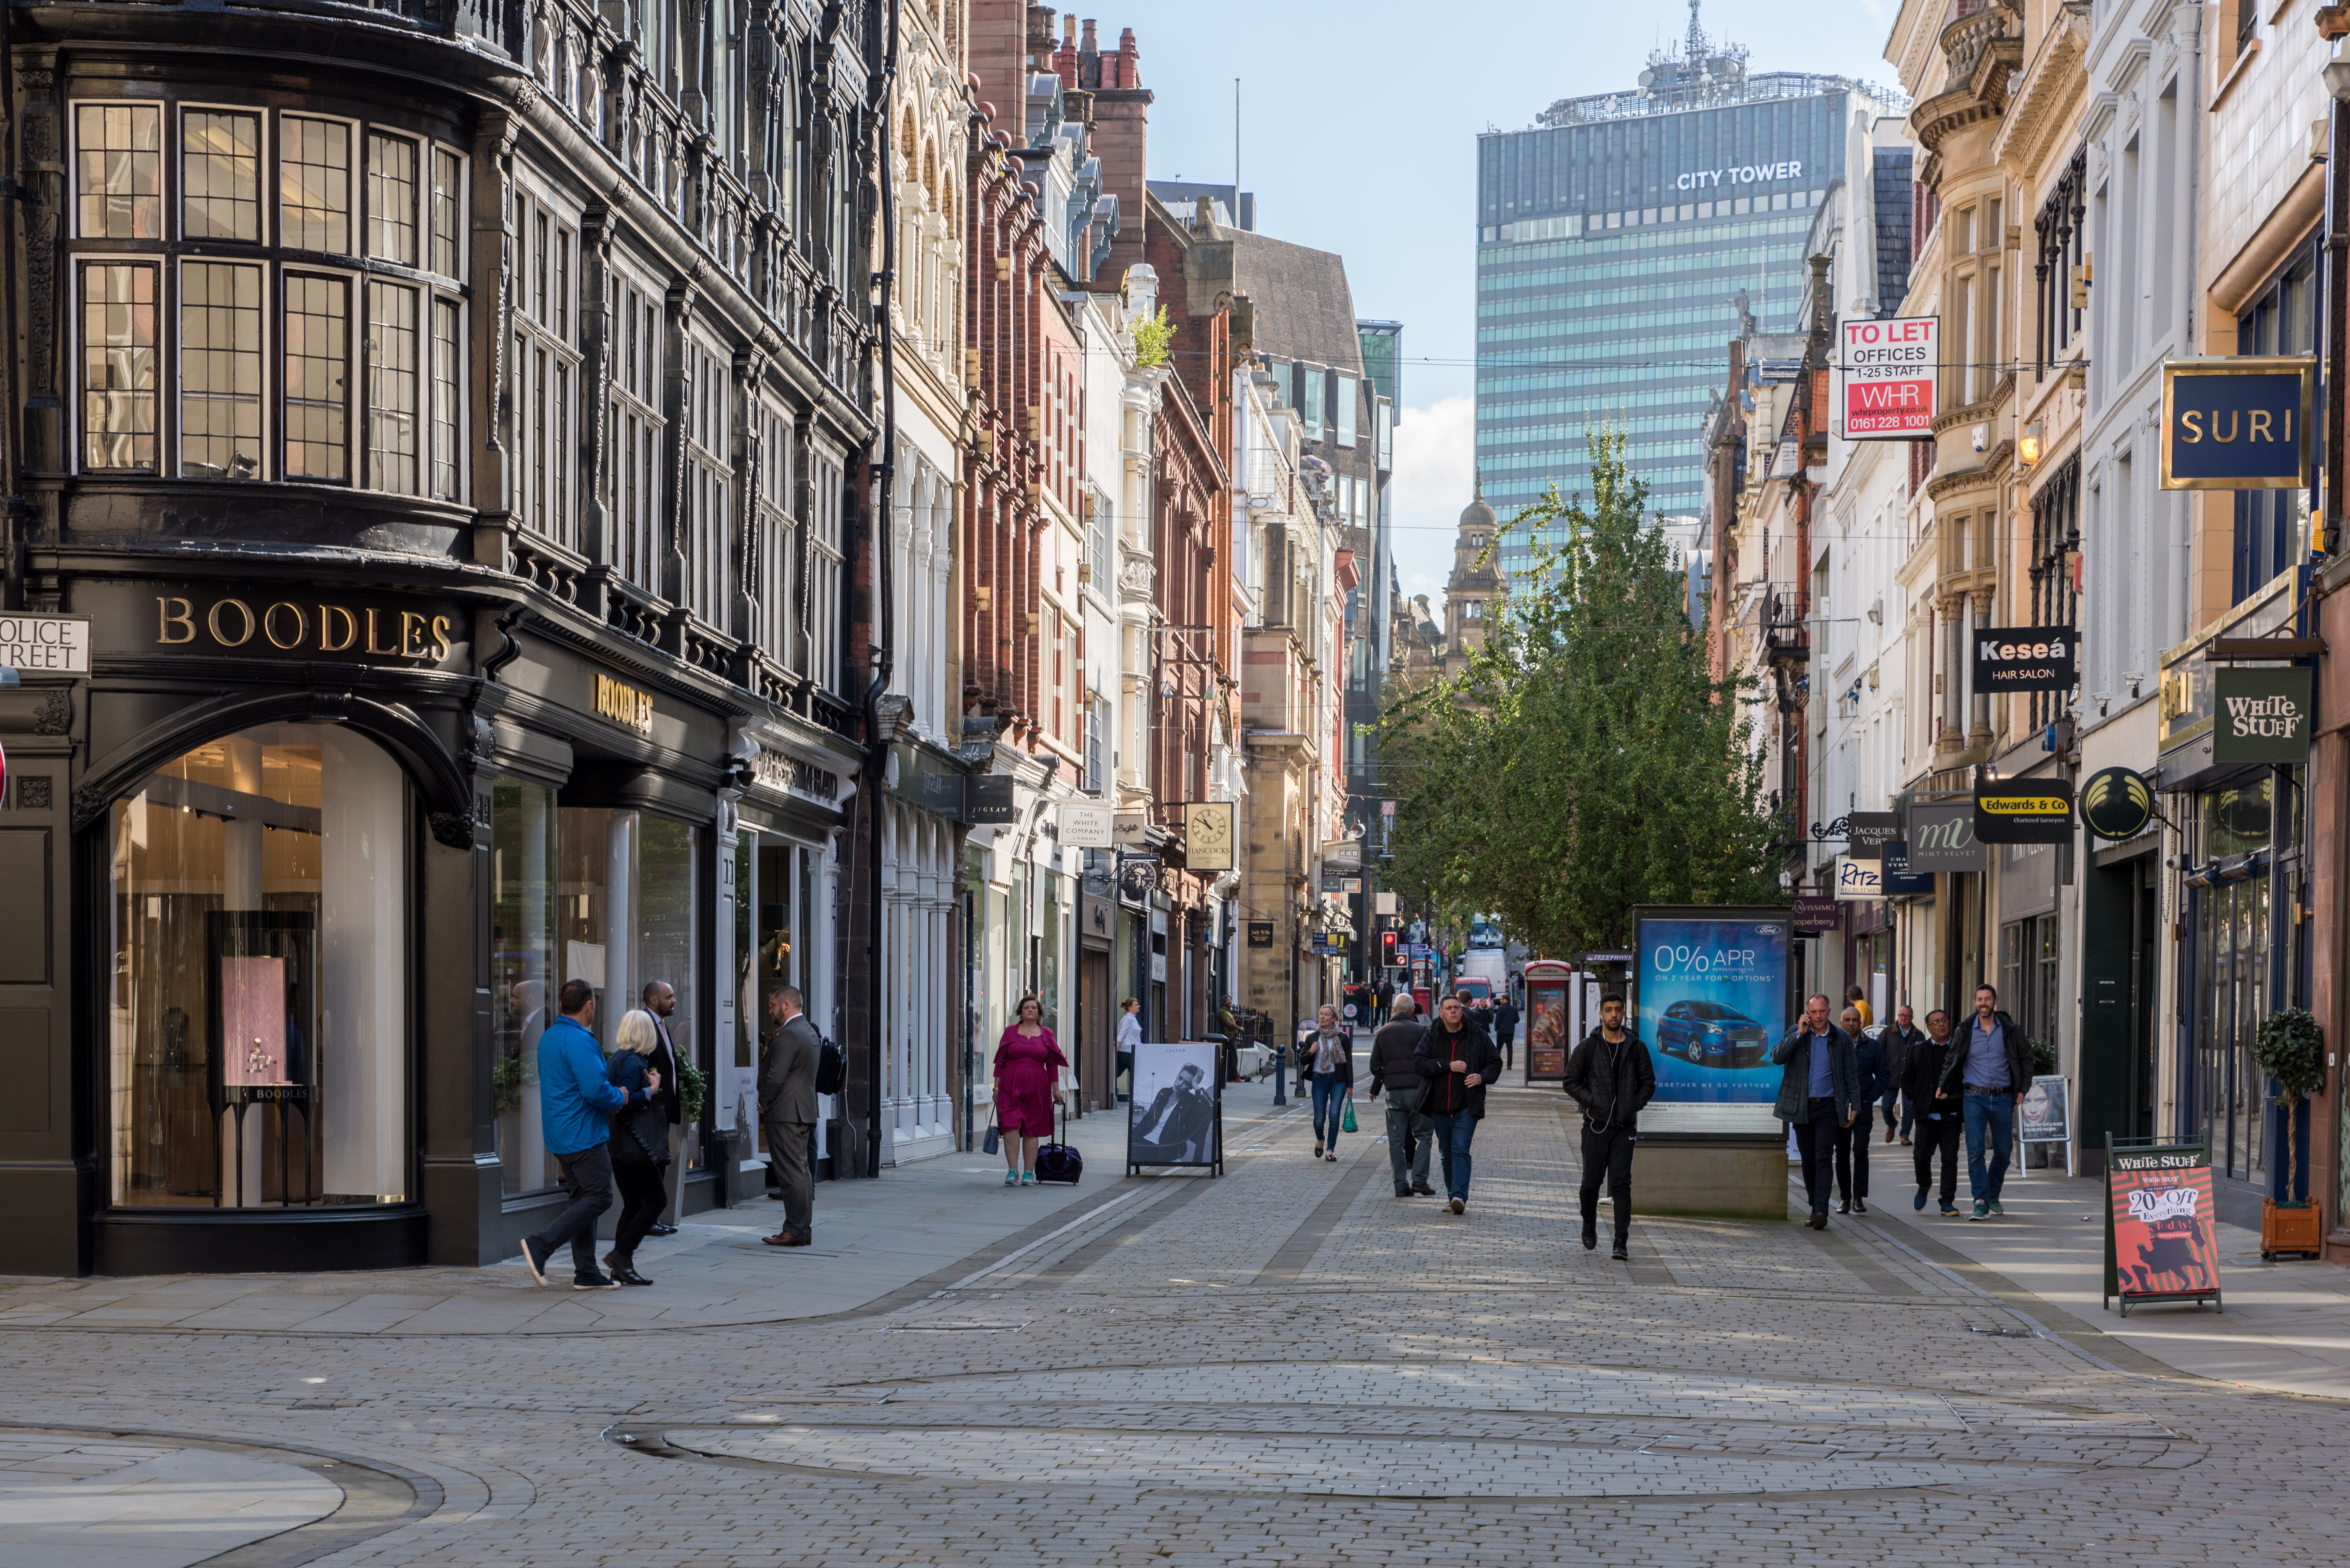 People walking down a street in Manchester City Centre